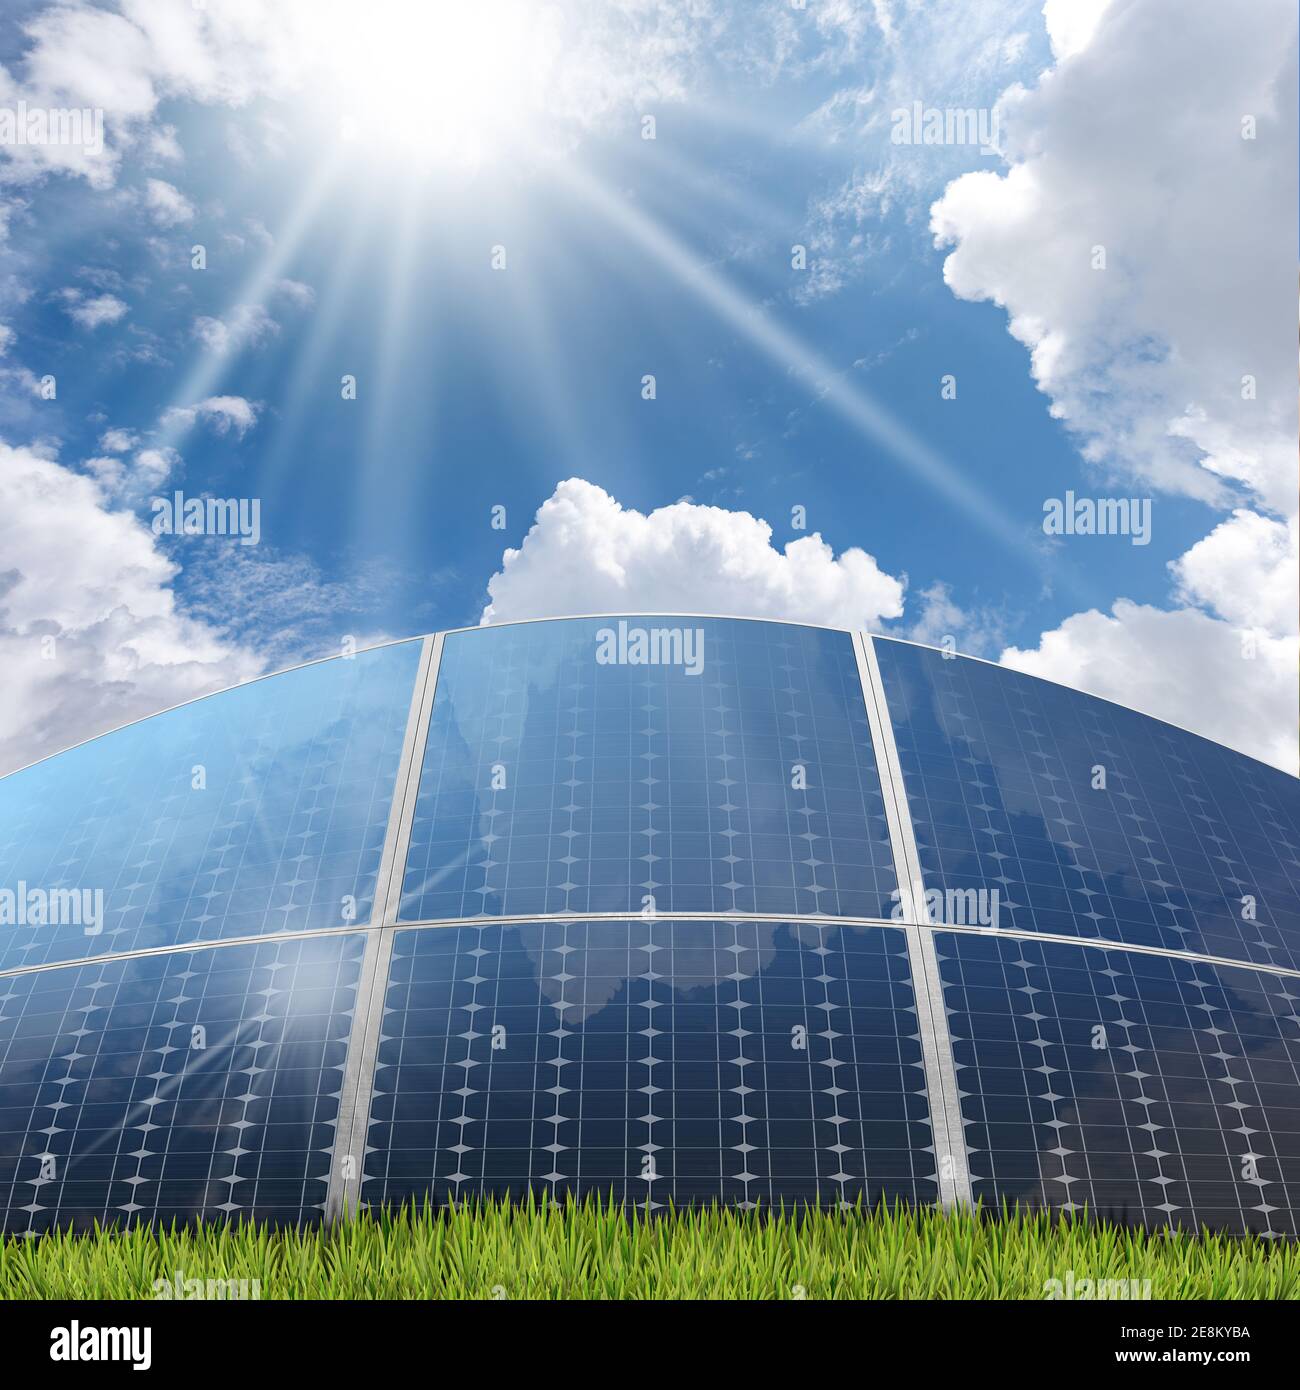 Group of solar panels on blue sky with clouds and sun rays, Front view. Solar energy concept. Stock Photo